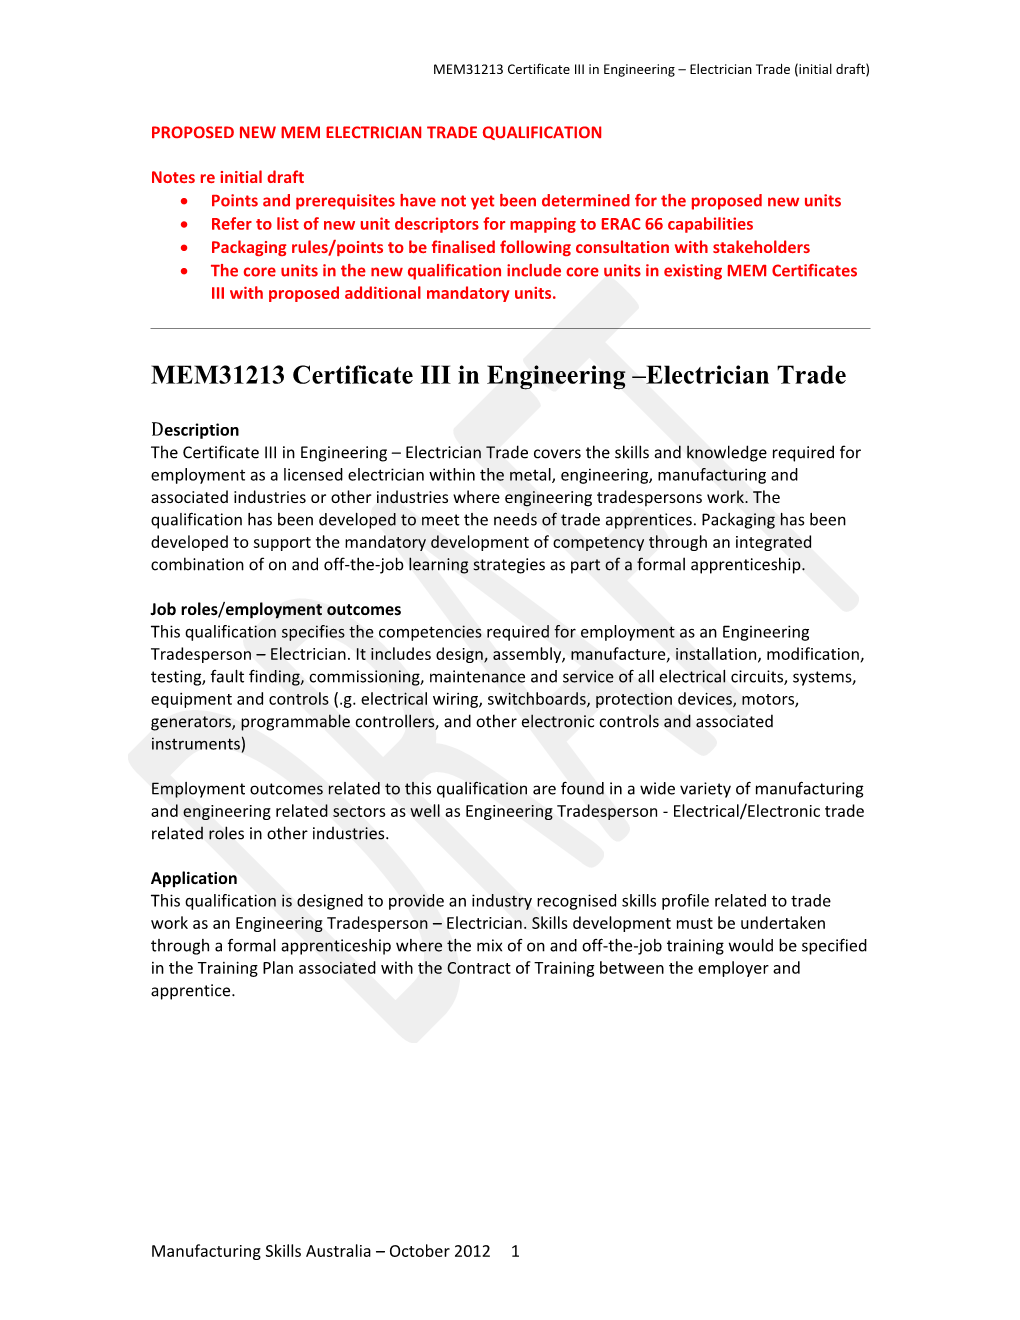 Proposed New Mem Electrician Trade Qualification